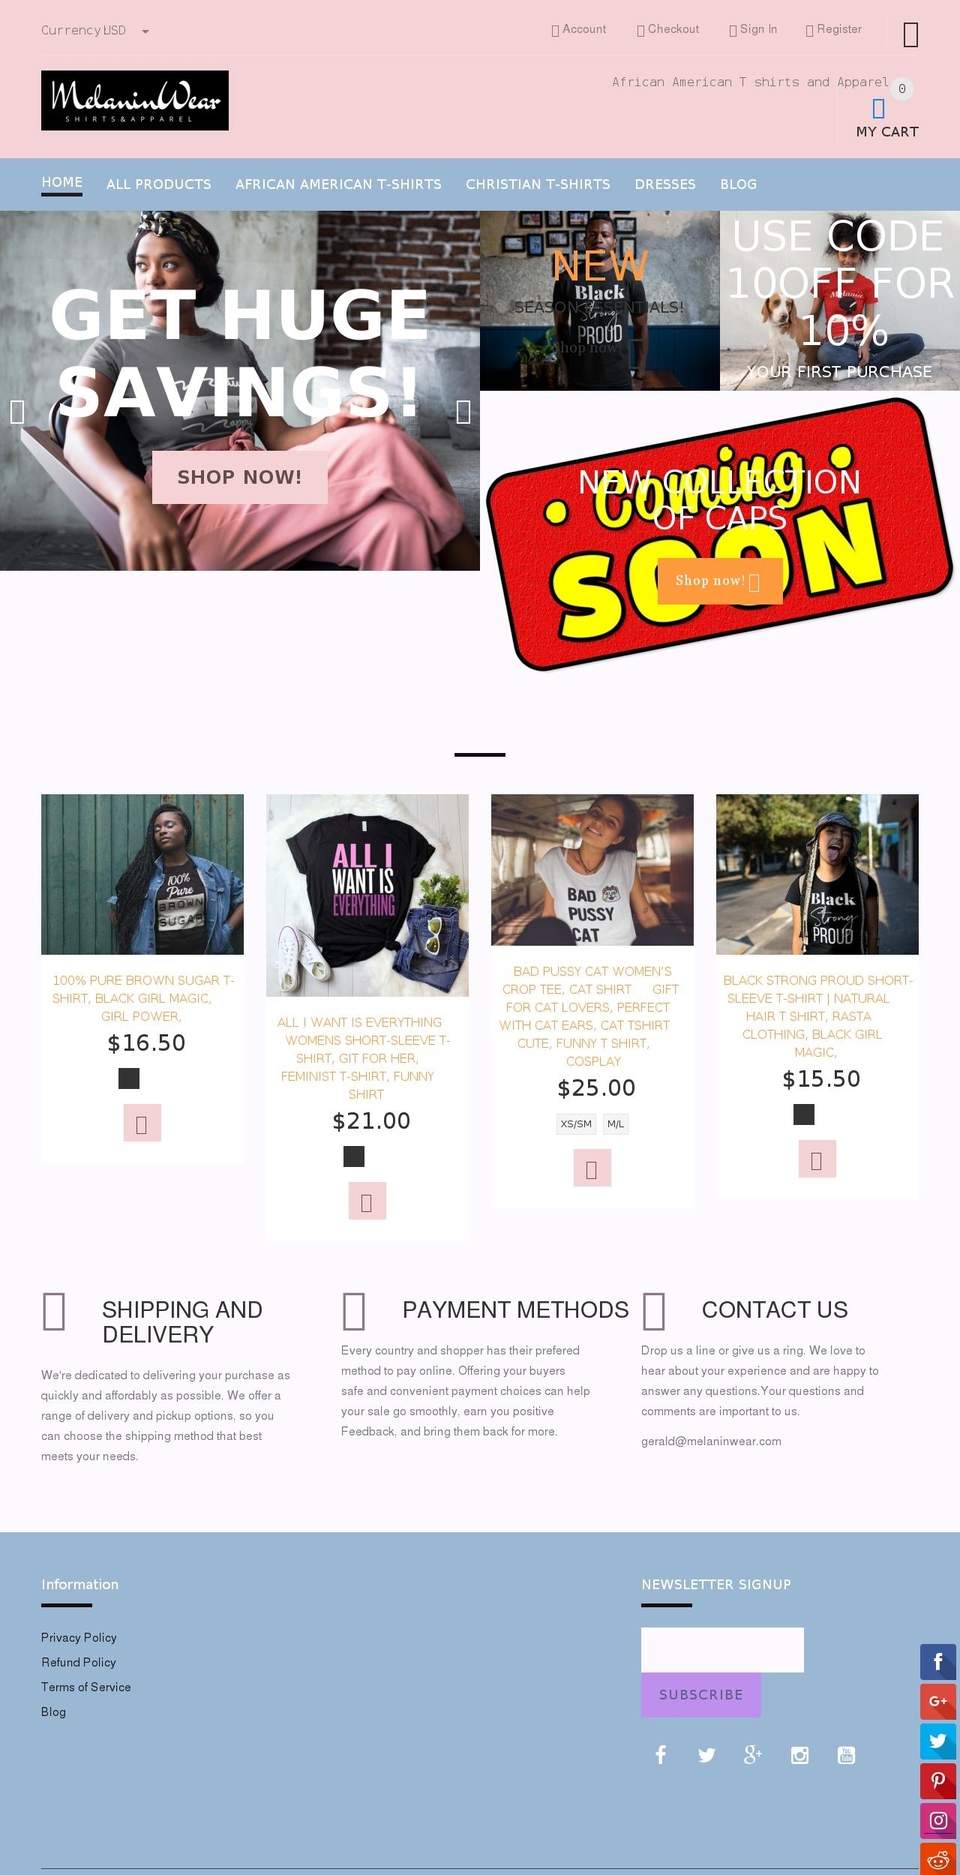 install-me-yourstore-v2-1-9 Shopify theme site example melaninwear.com